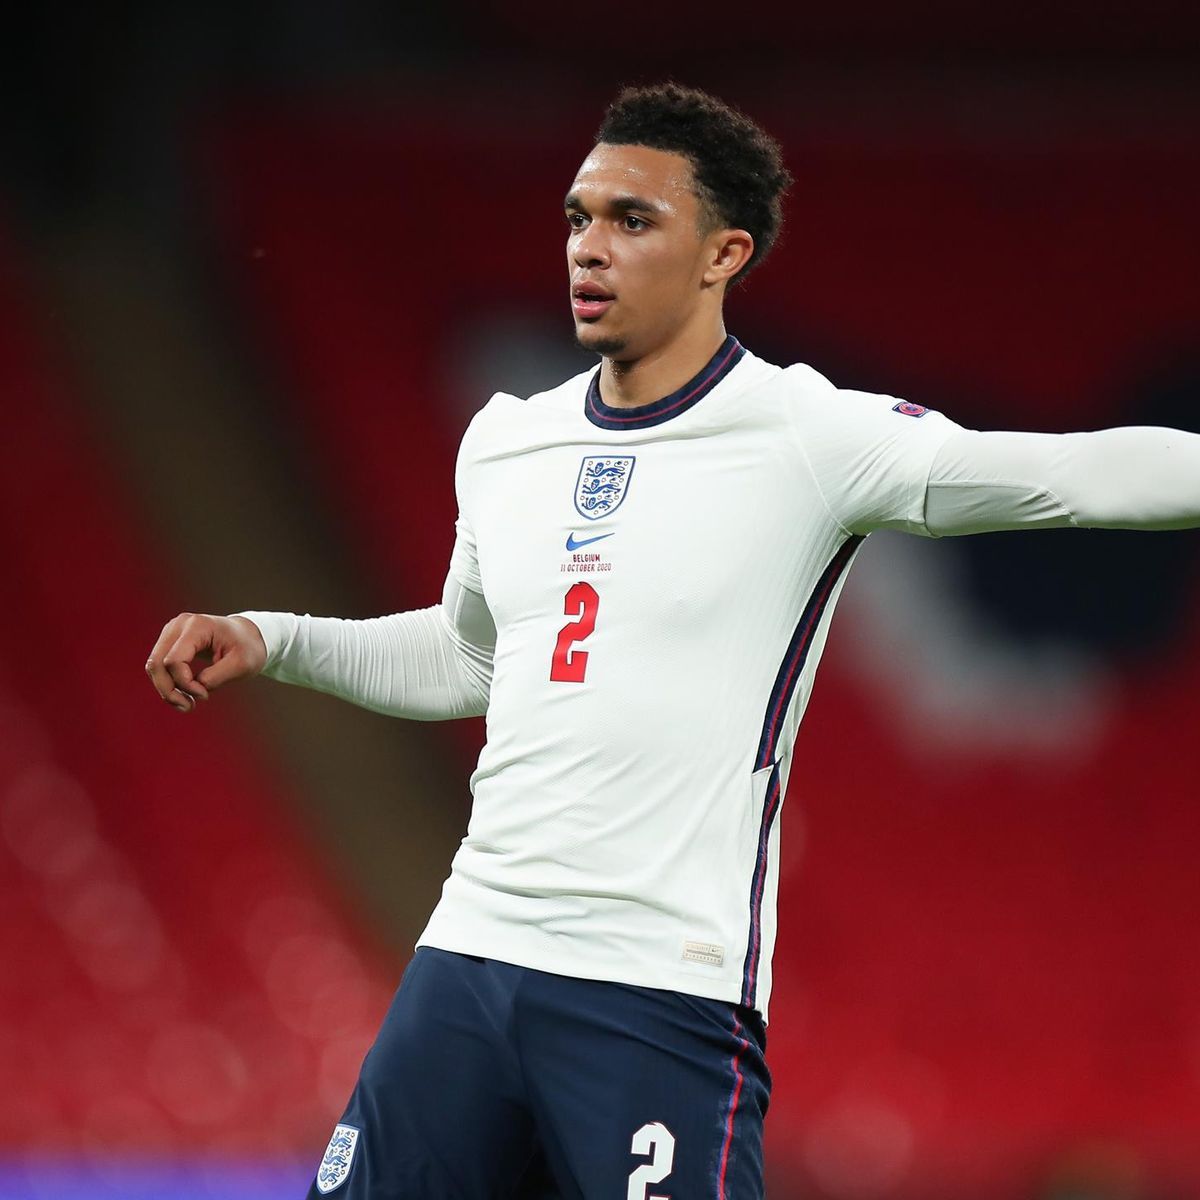 England Squad: Gareth Southgate Names 26 Man Squad For Euro 2020 Arnold In, Lingard, Ward Prowse Out